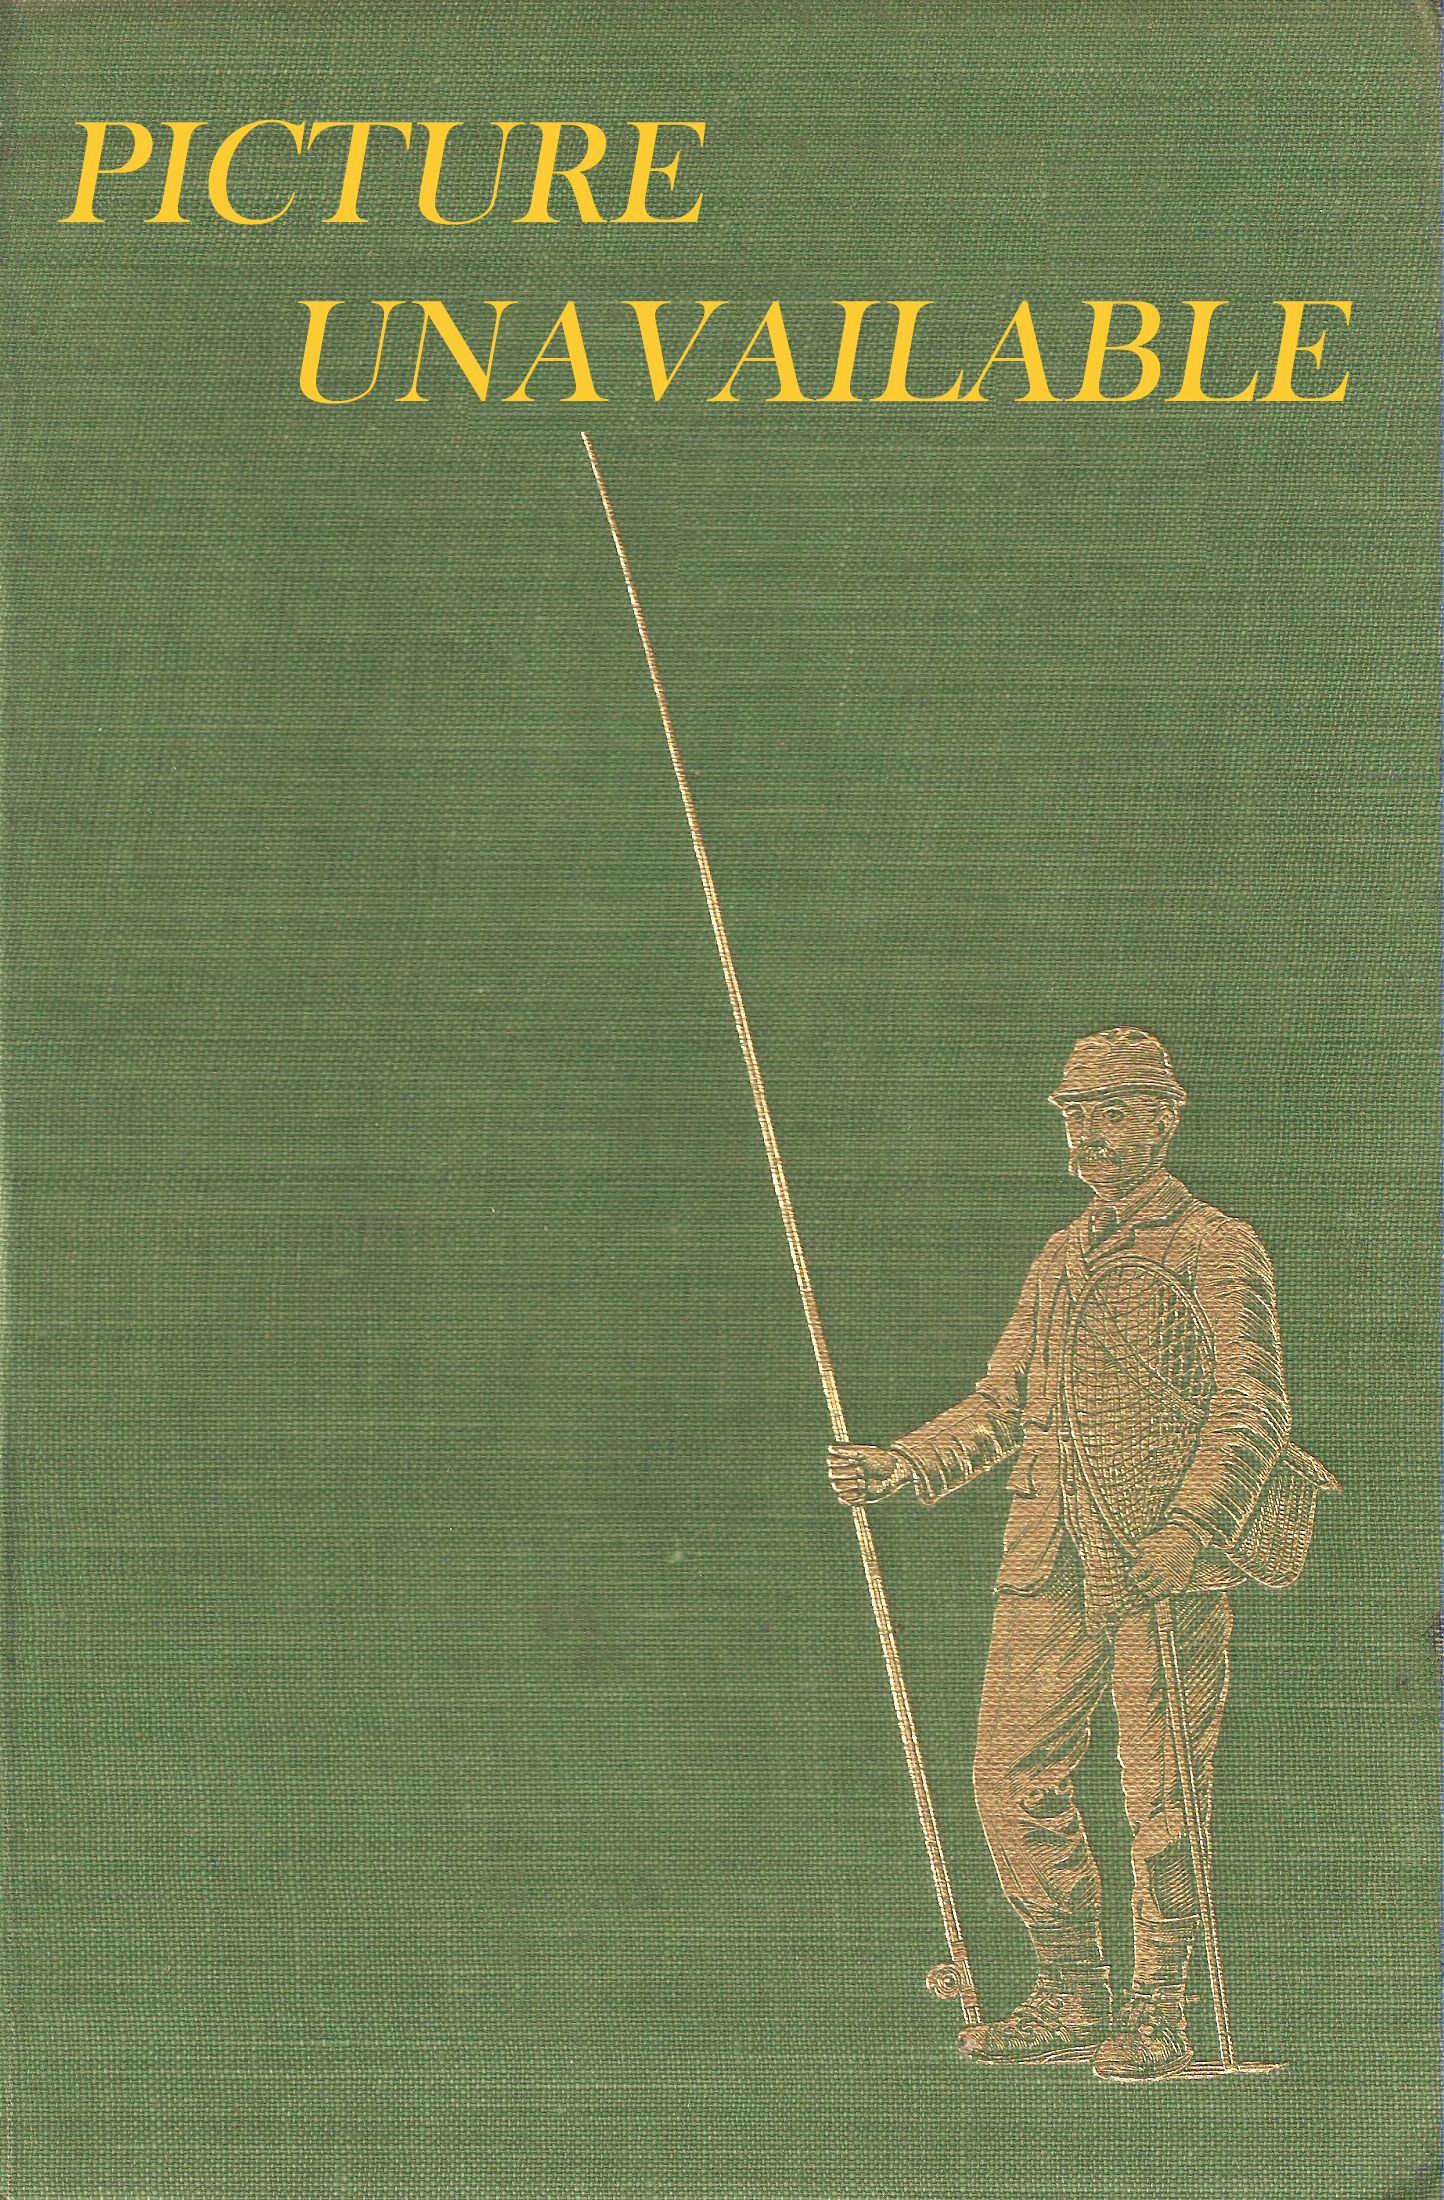 THE BANVILLE DIARIES: JOURNALS OF A NORFOLK GAMEKEEPER 1822-44. Edited by Norman Virgoe and Susan Yaxley. Introduction by Lord Buxton.